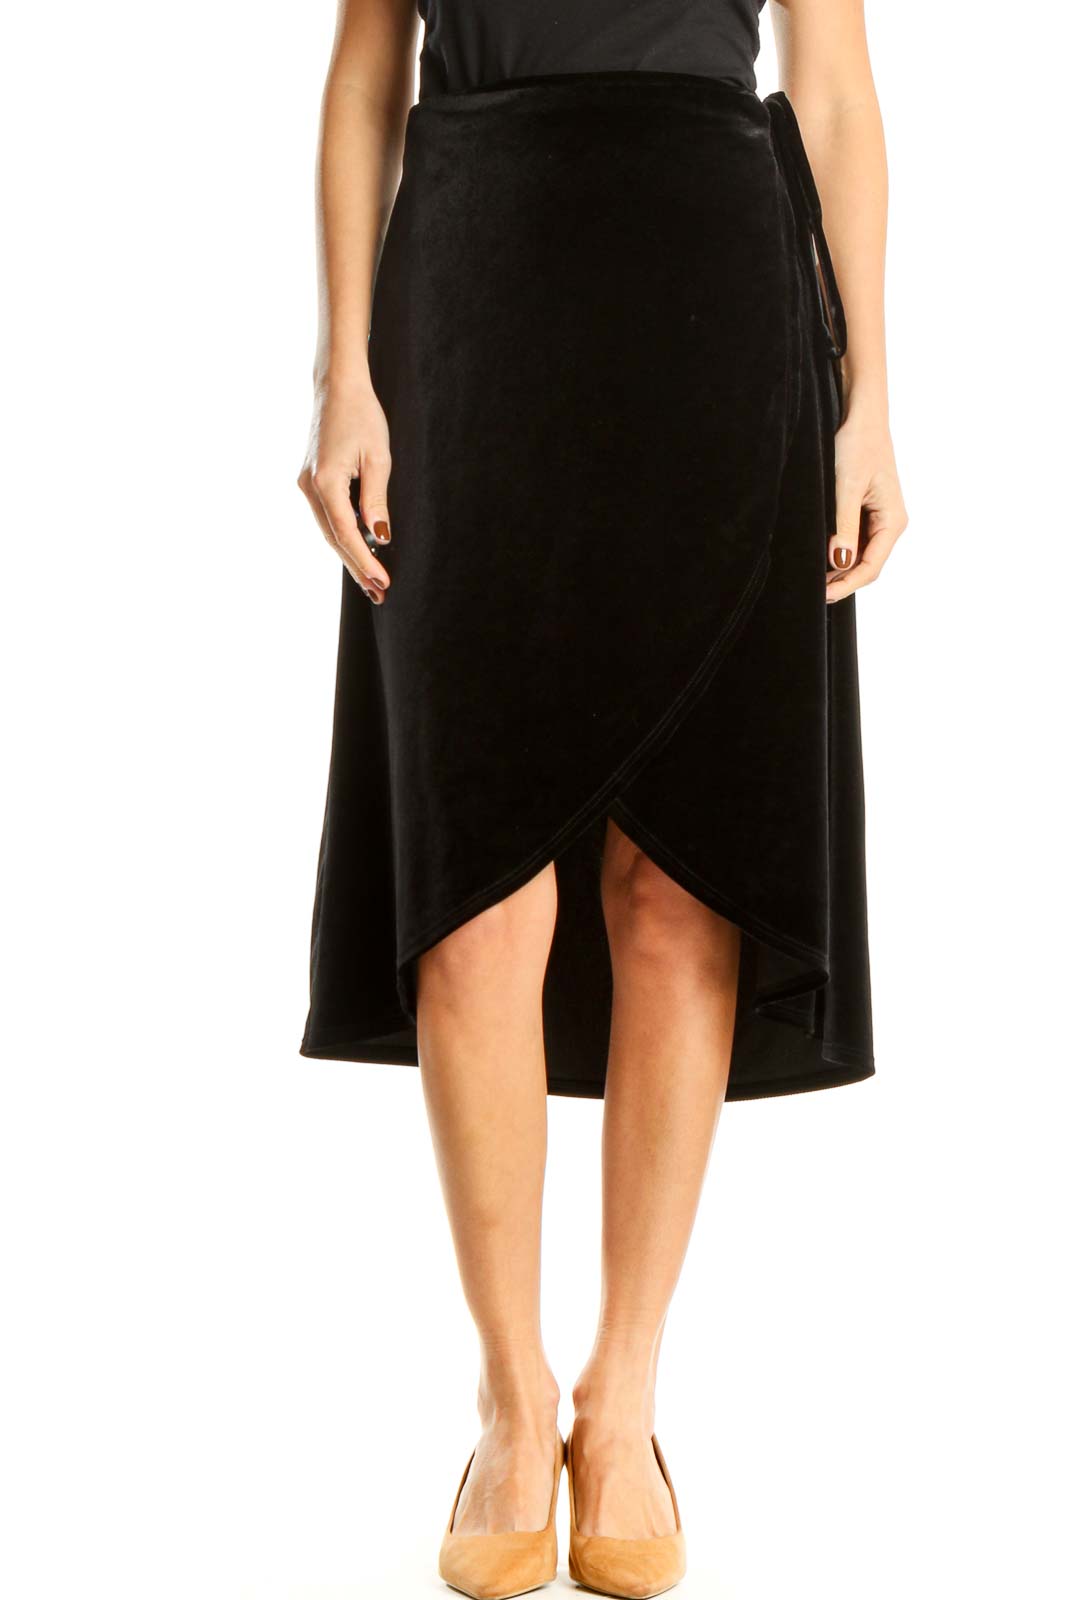 Black Textured Chic A-Line Skirt Front